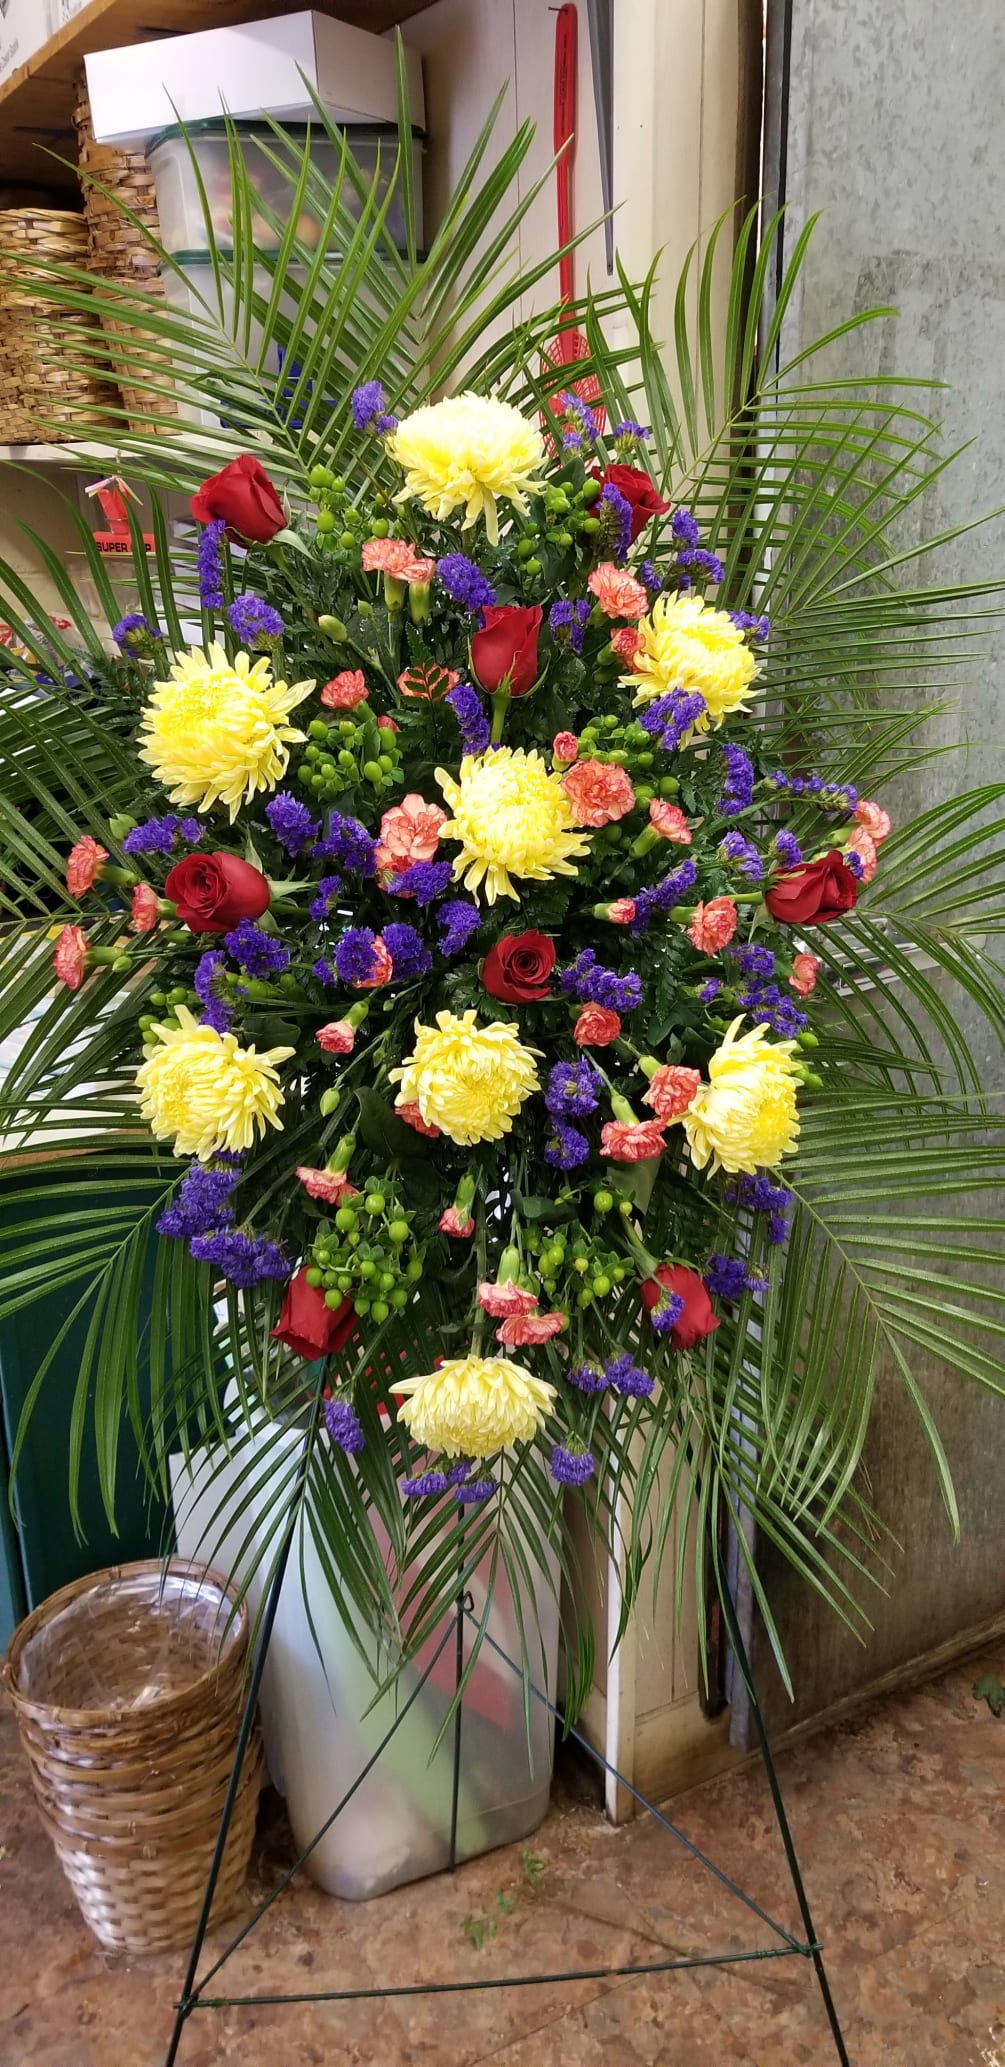 A wonderful combination of yellow, red and purple flowers arranged for a